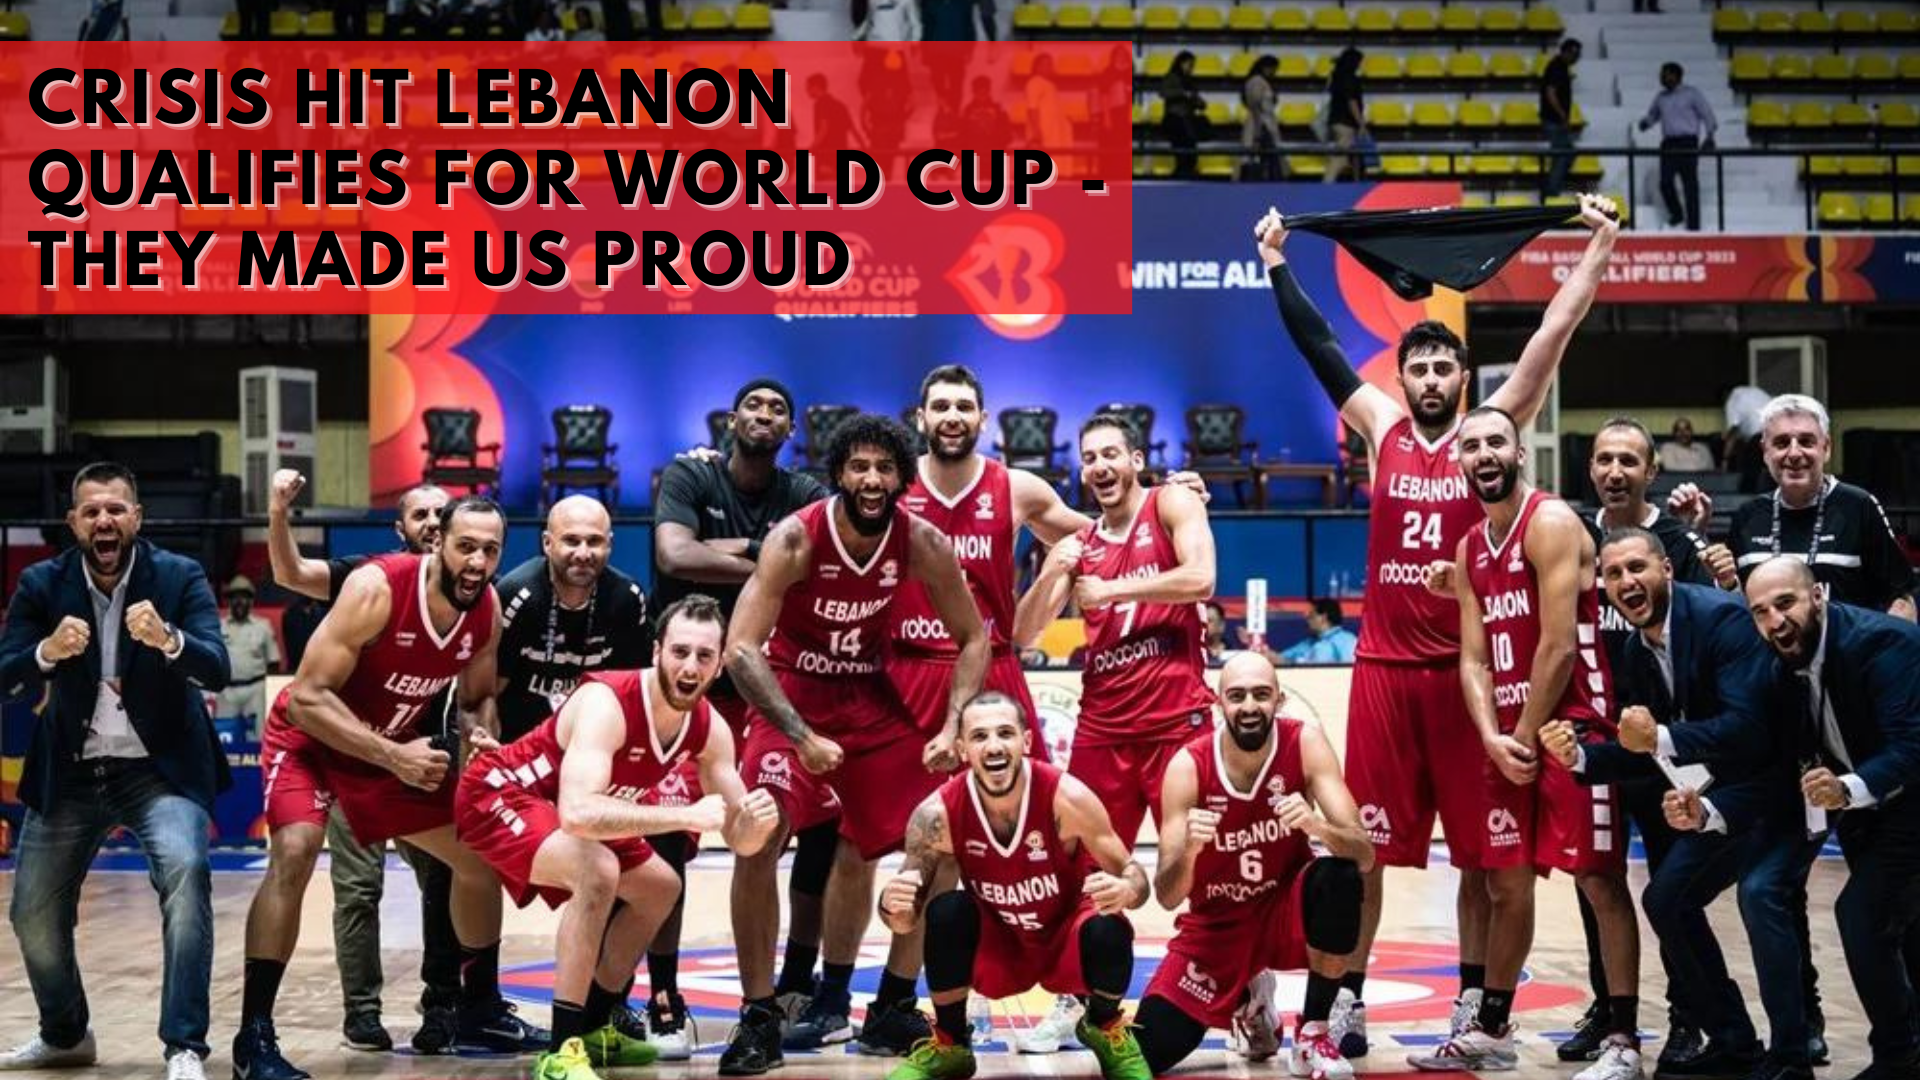 Crisis Hit Lebanon Qualifies For The World Cup - Making The Whole Country Proud